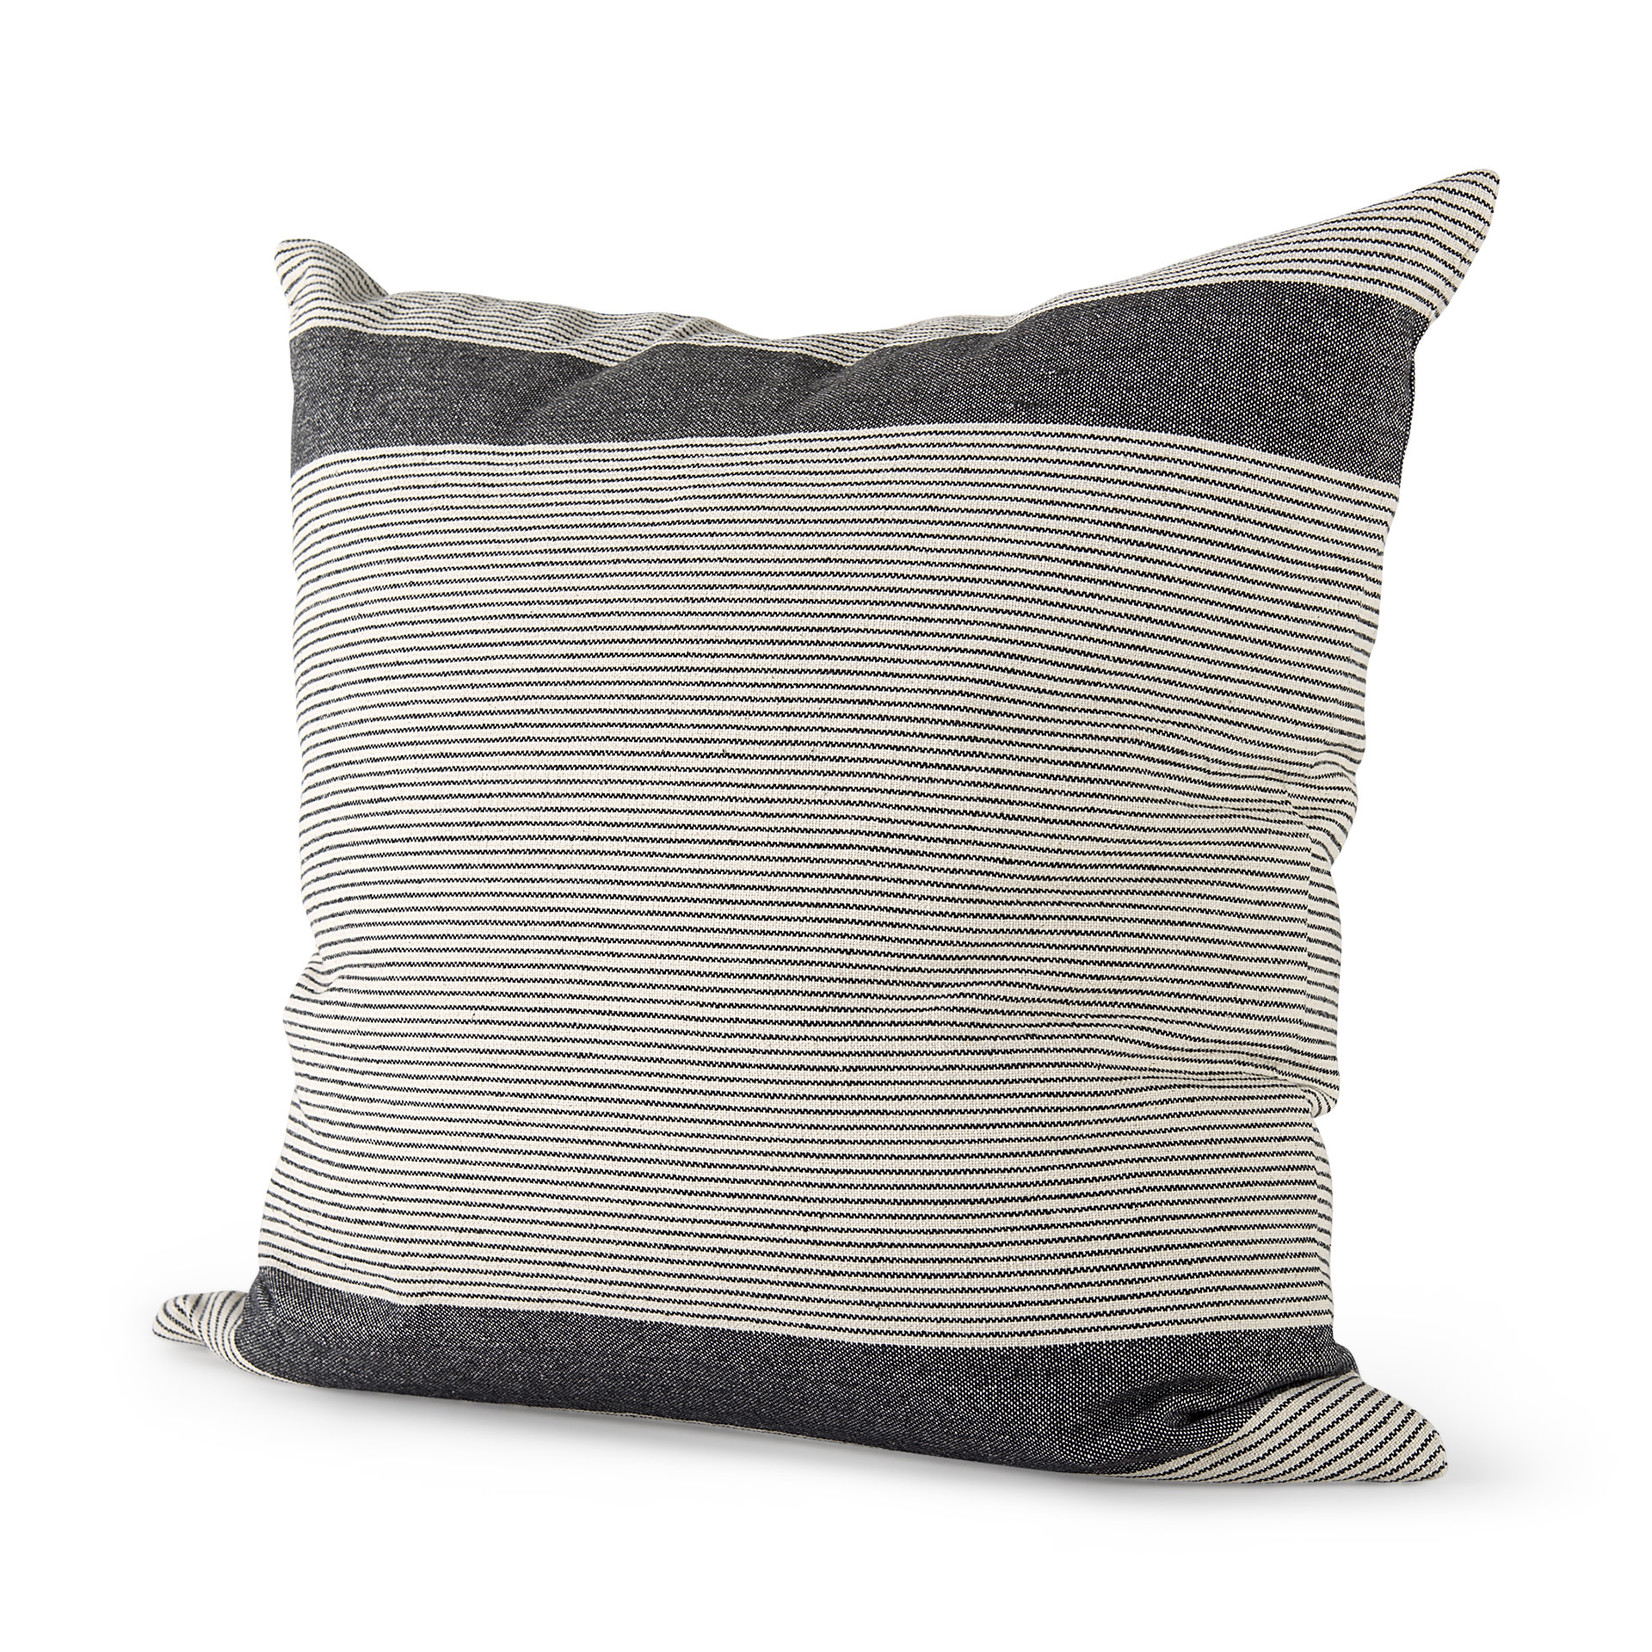 Nancy 22 x 22 Beige With Black Stripe Pillow Cover